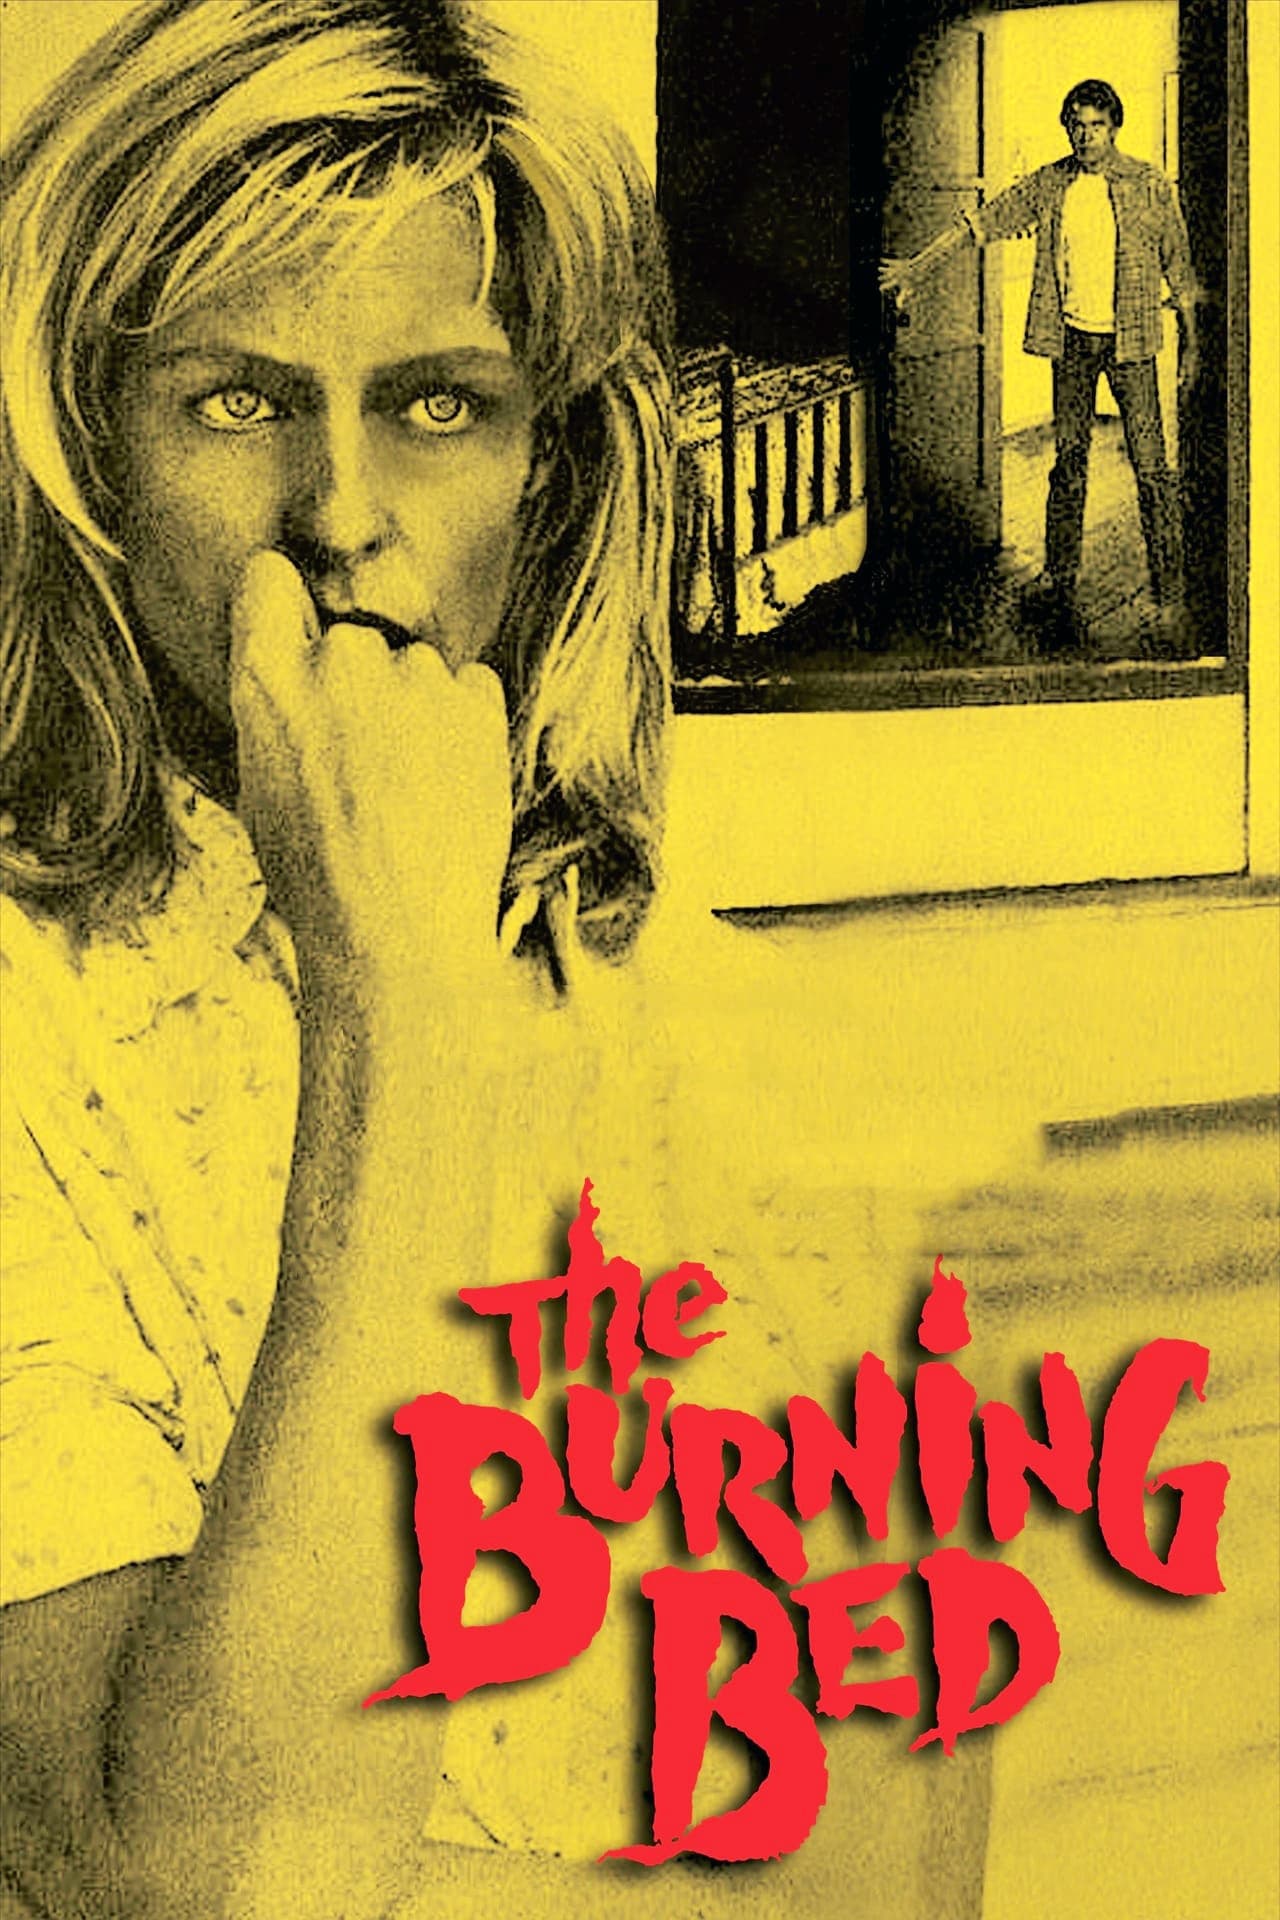 The Burning Bed (1984)